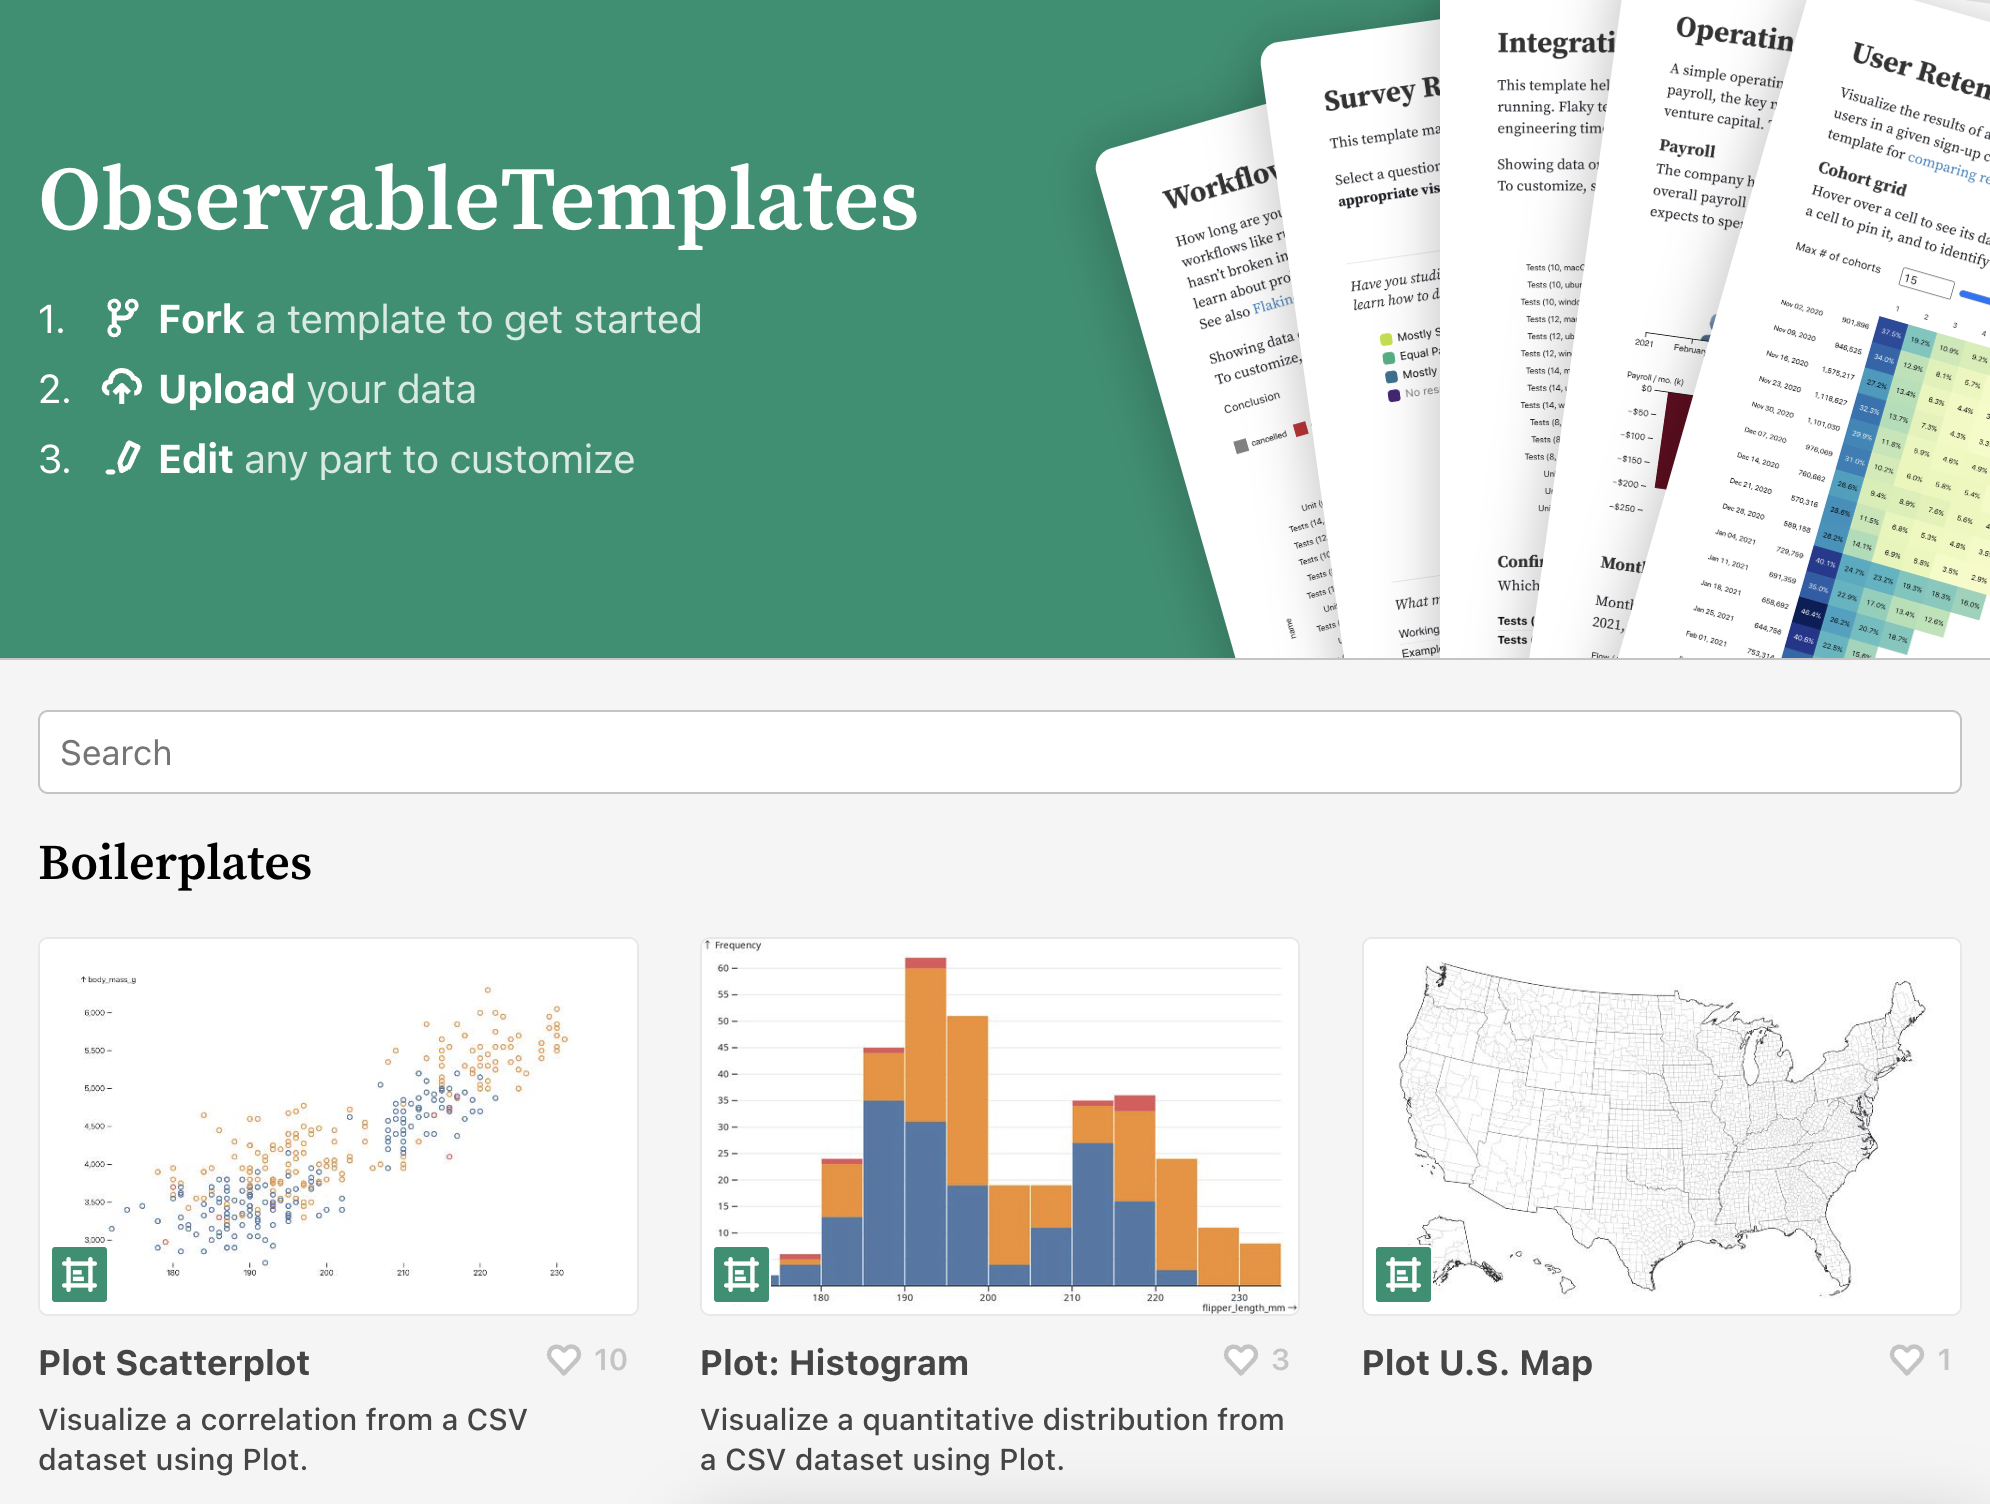 Screenshot of the Templates page in Observable, showing several different template options to create a scatterplot, histogram, and more, with a banner at the top instructing users to Fork a template to get started, Upload your data, then Edit any part to customize.